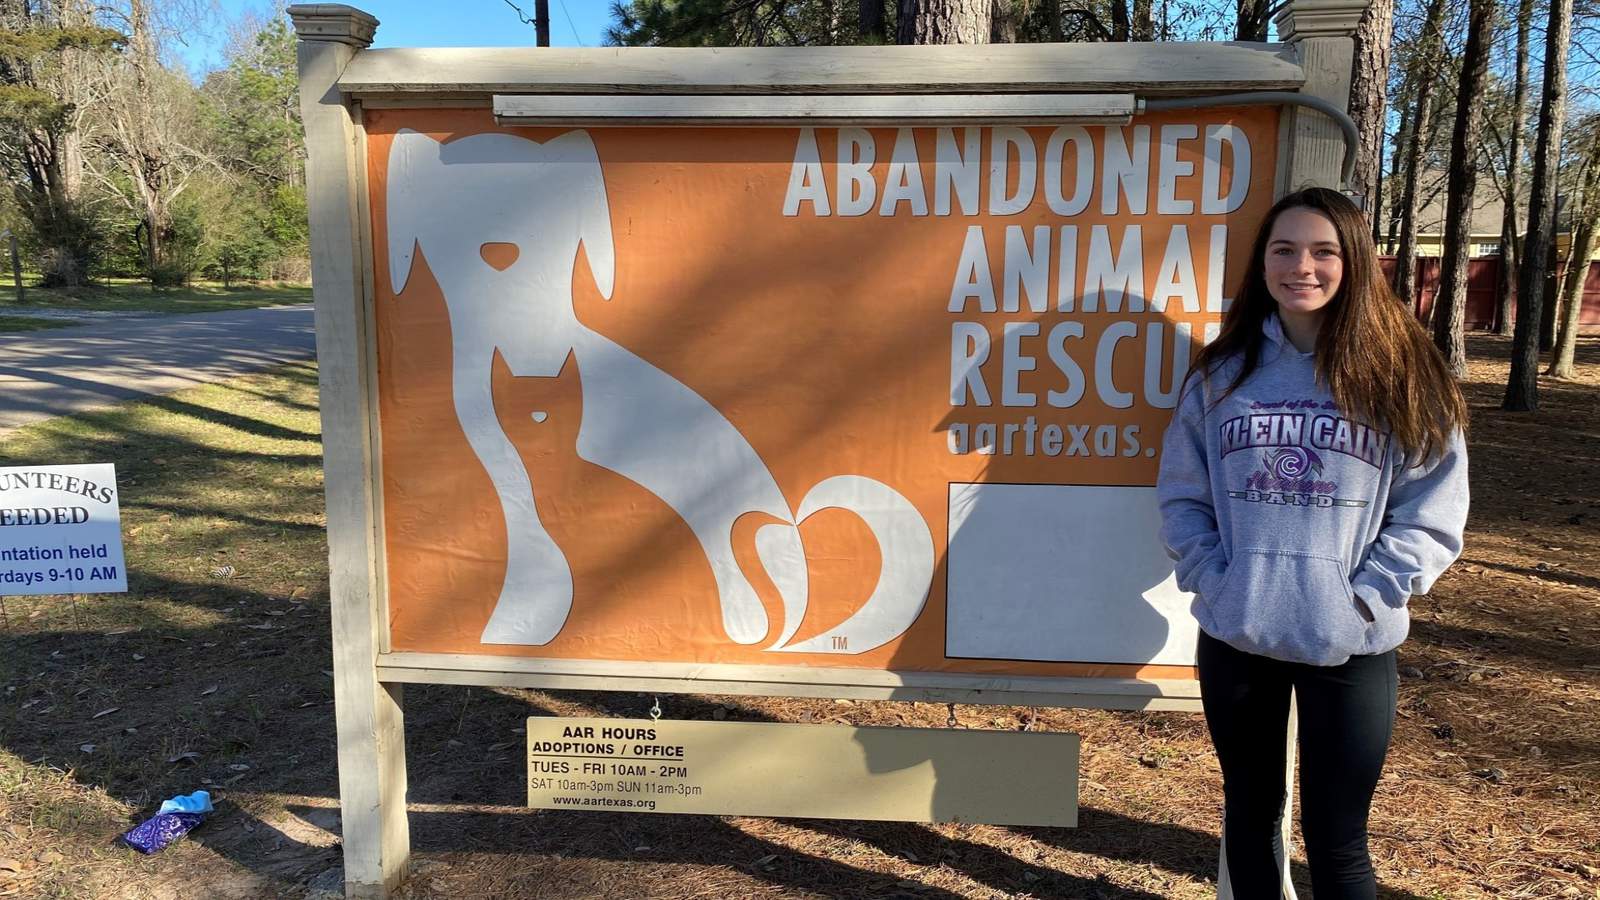 KPRC 2 Senior Scholarship: Meet Jordan McAlister, the teen helping animals while planning for a future in business